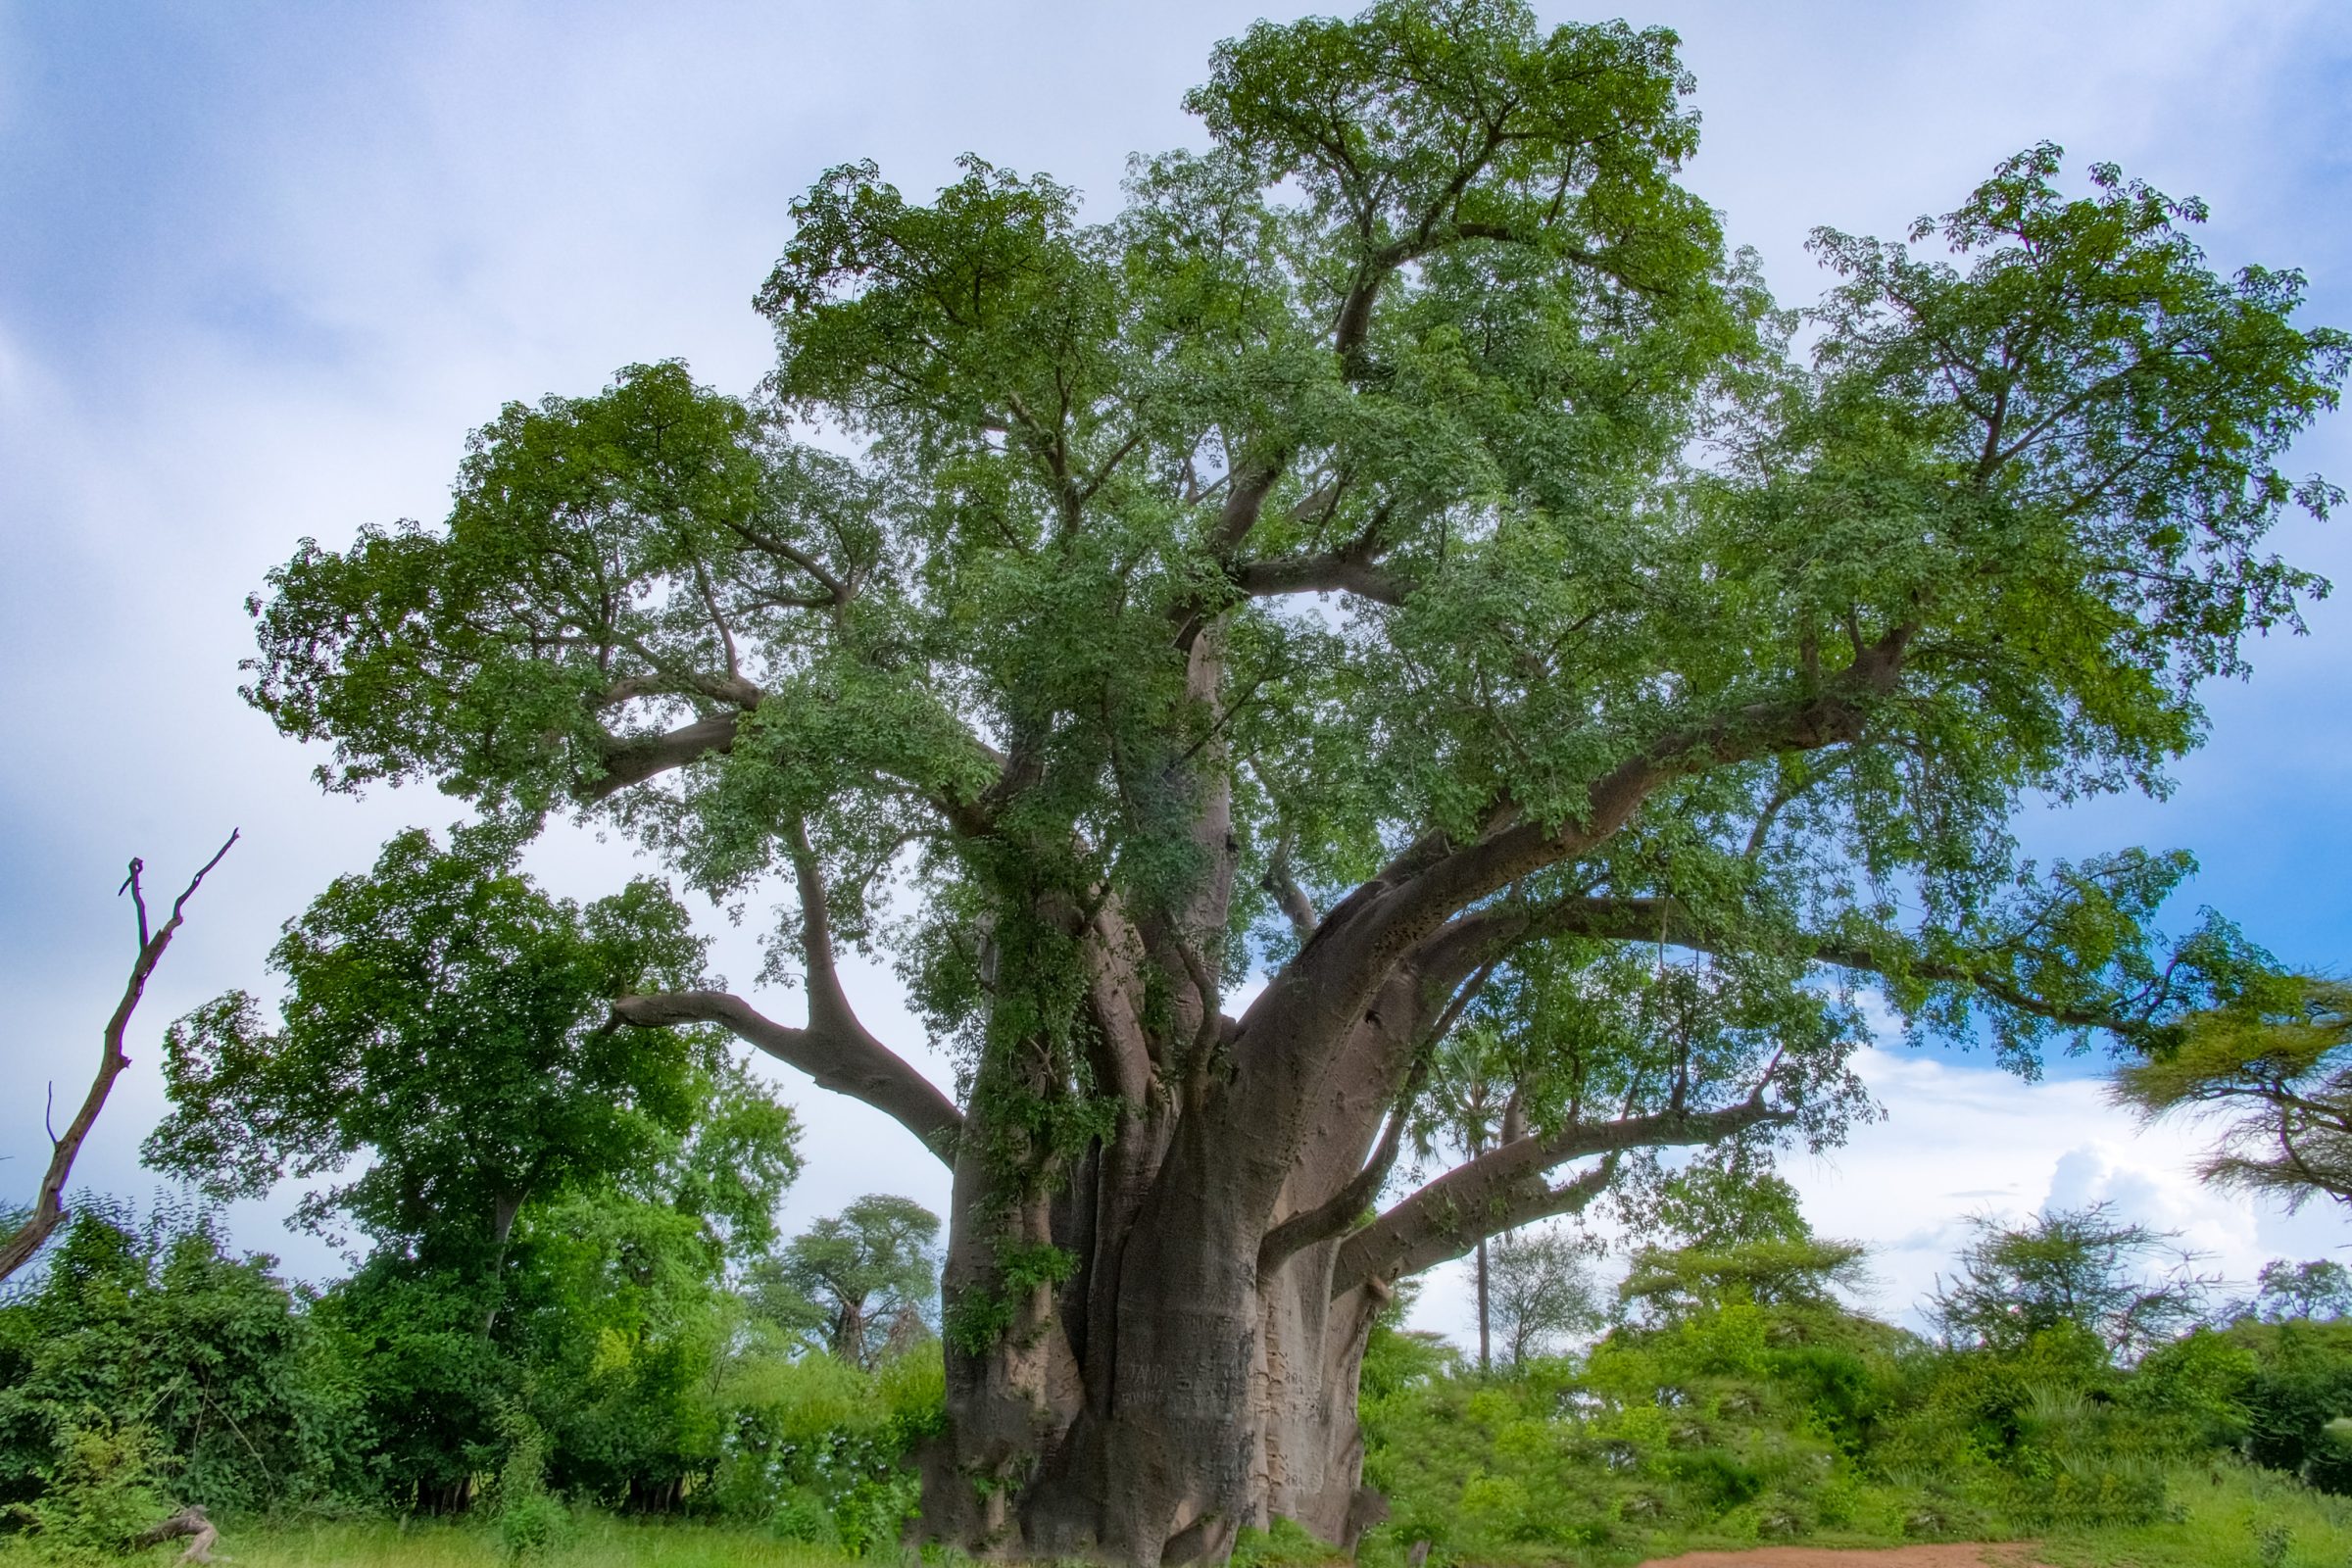 The Big Tree, the large baobab tree just outside Victoria Falls National park